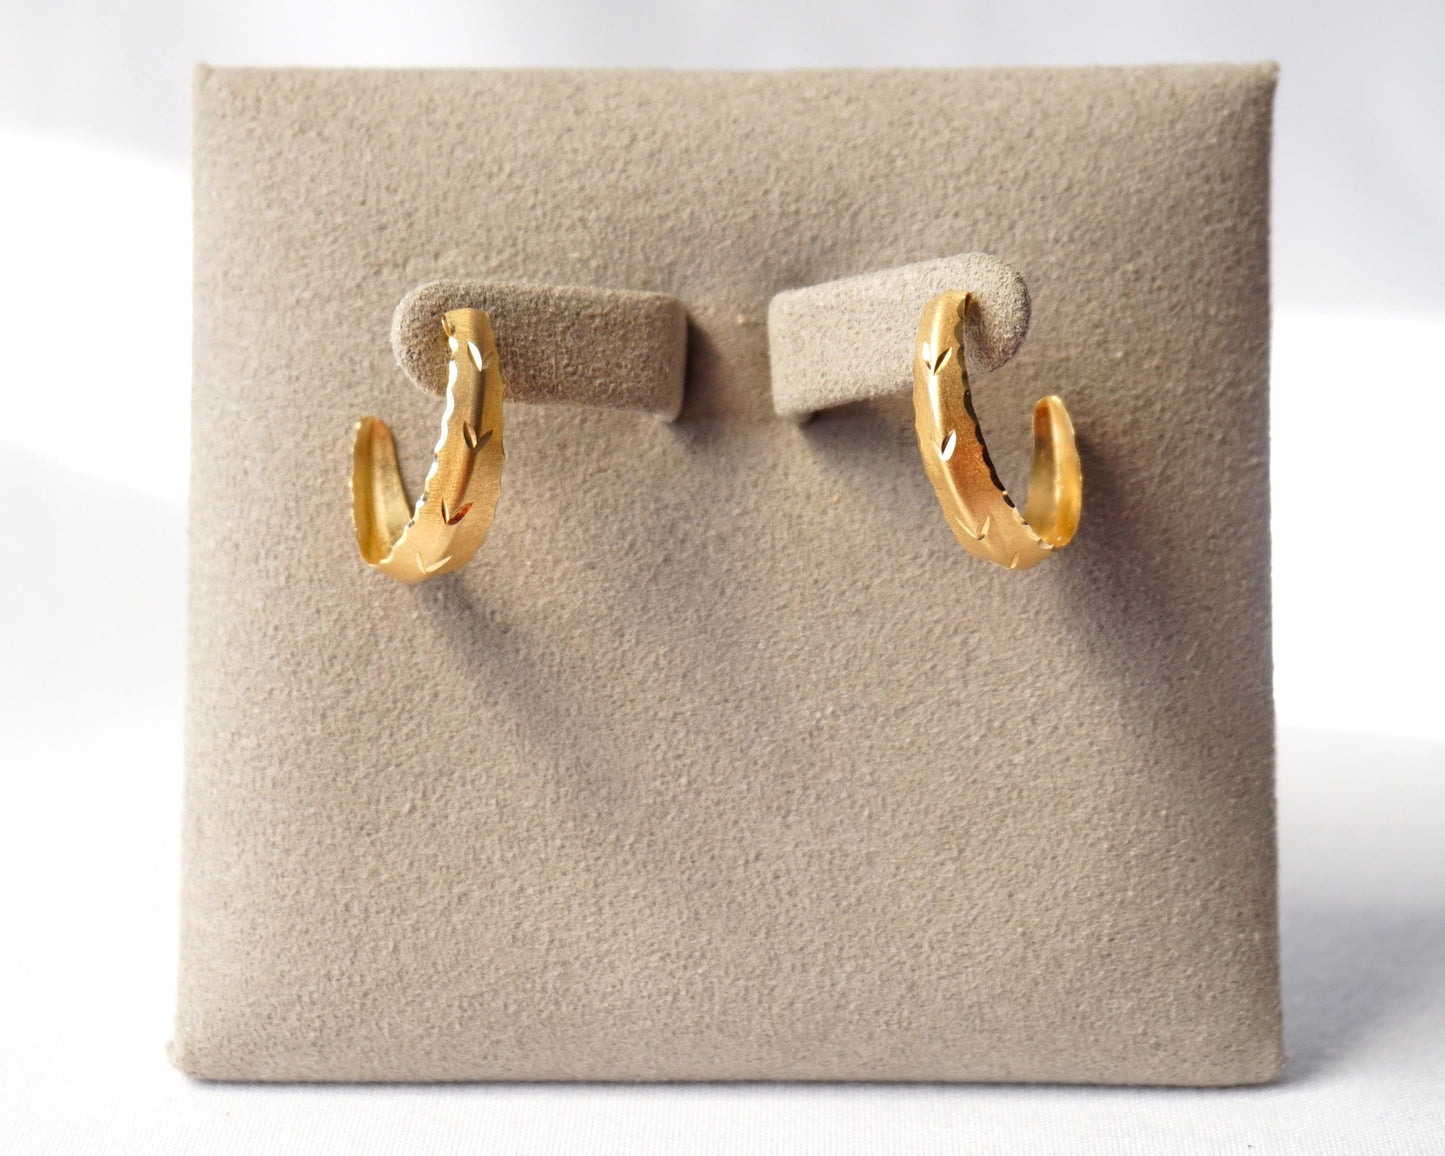 Unique Vintage 14K Gold CARLA Dainty Crescent Scalloped Hoops, Estate Everyday Textured Hoops